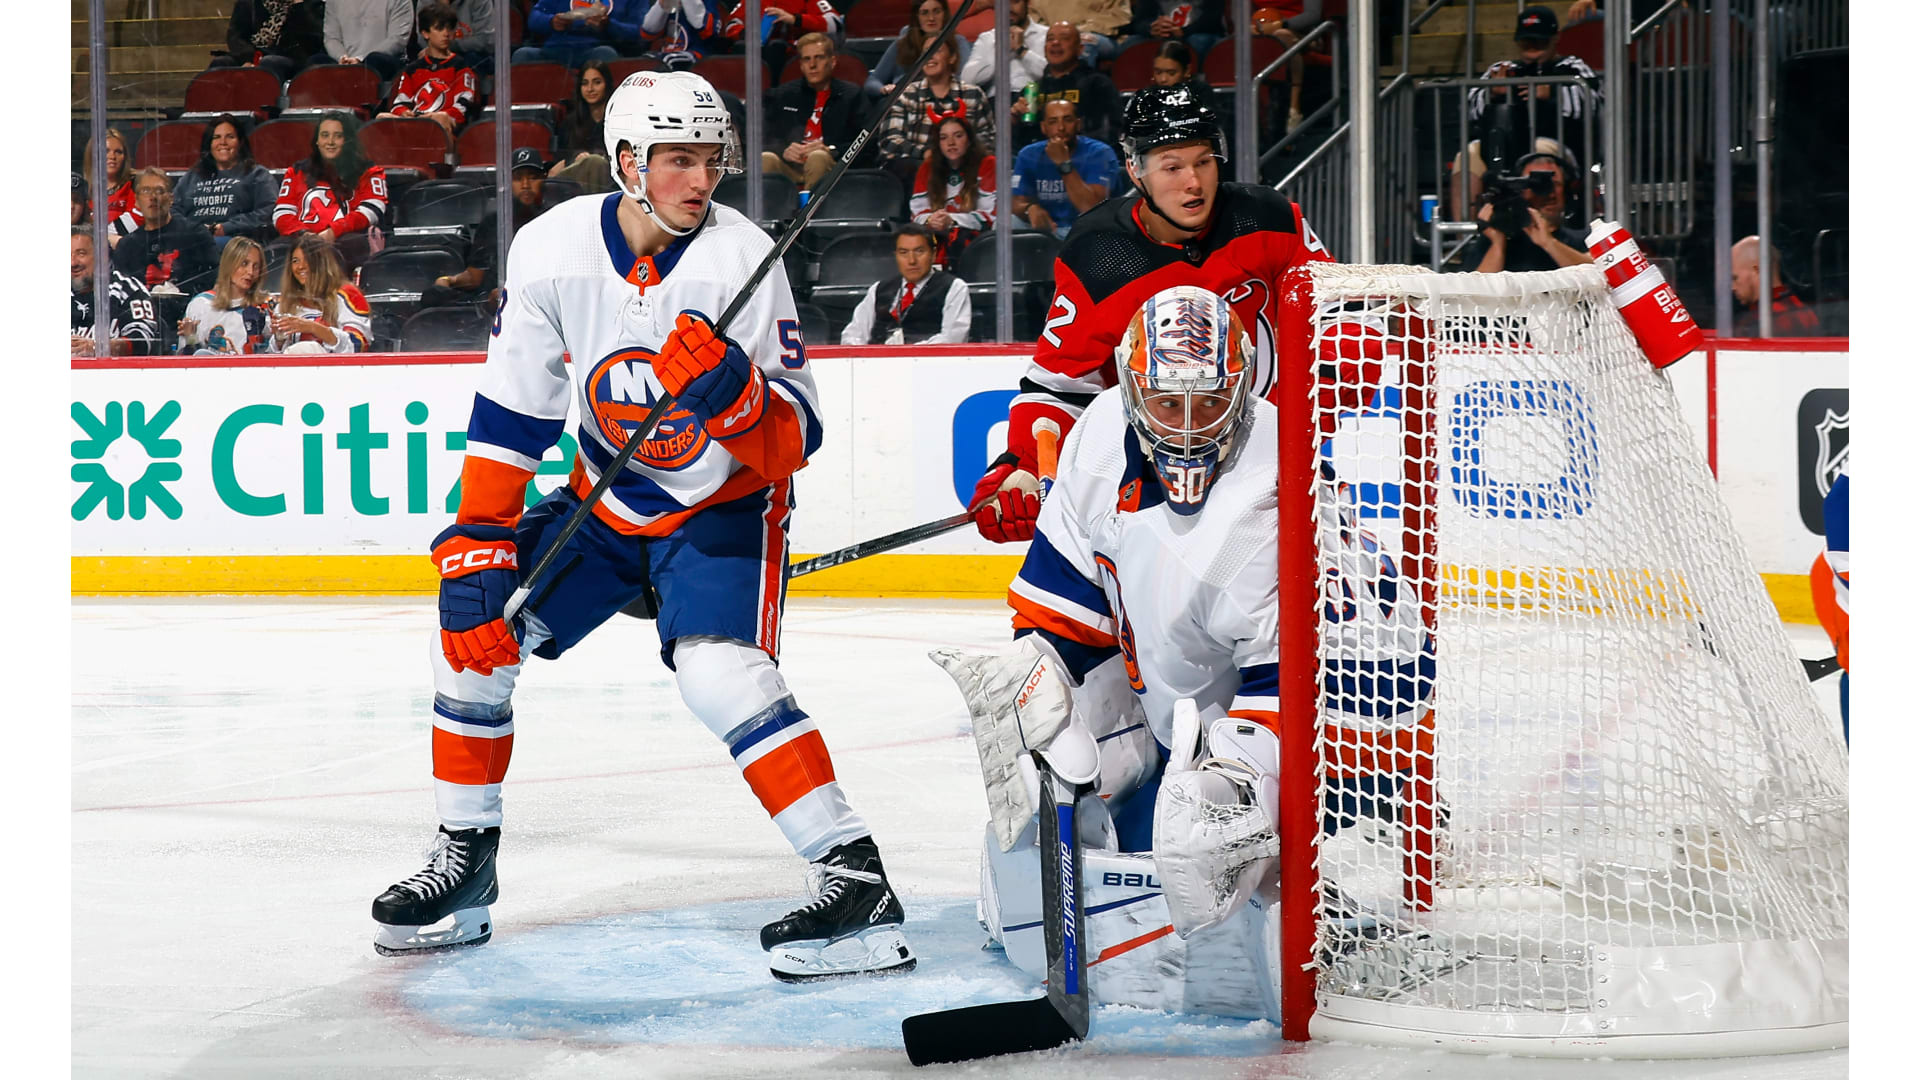 Nelson Scores 2 to Lead Islanders to 6-4 Win Over Devils